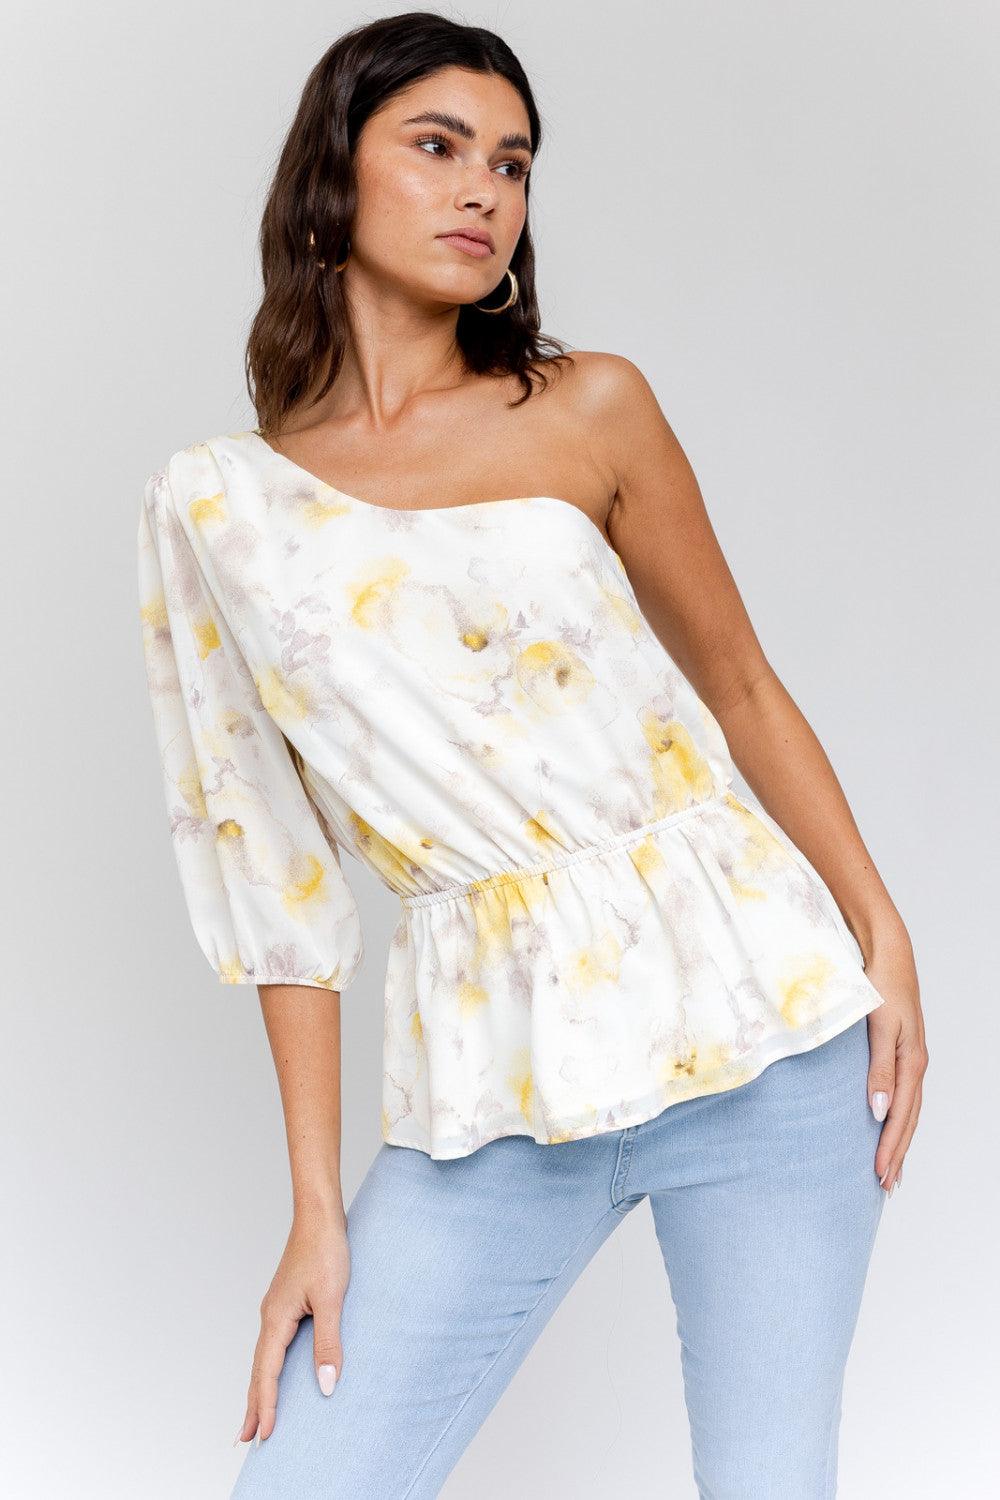 One Shoulder Yellow Floral Top - Strawberry Moon Boutique